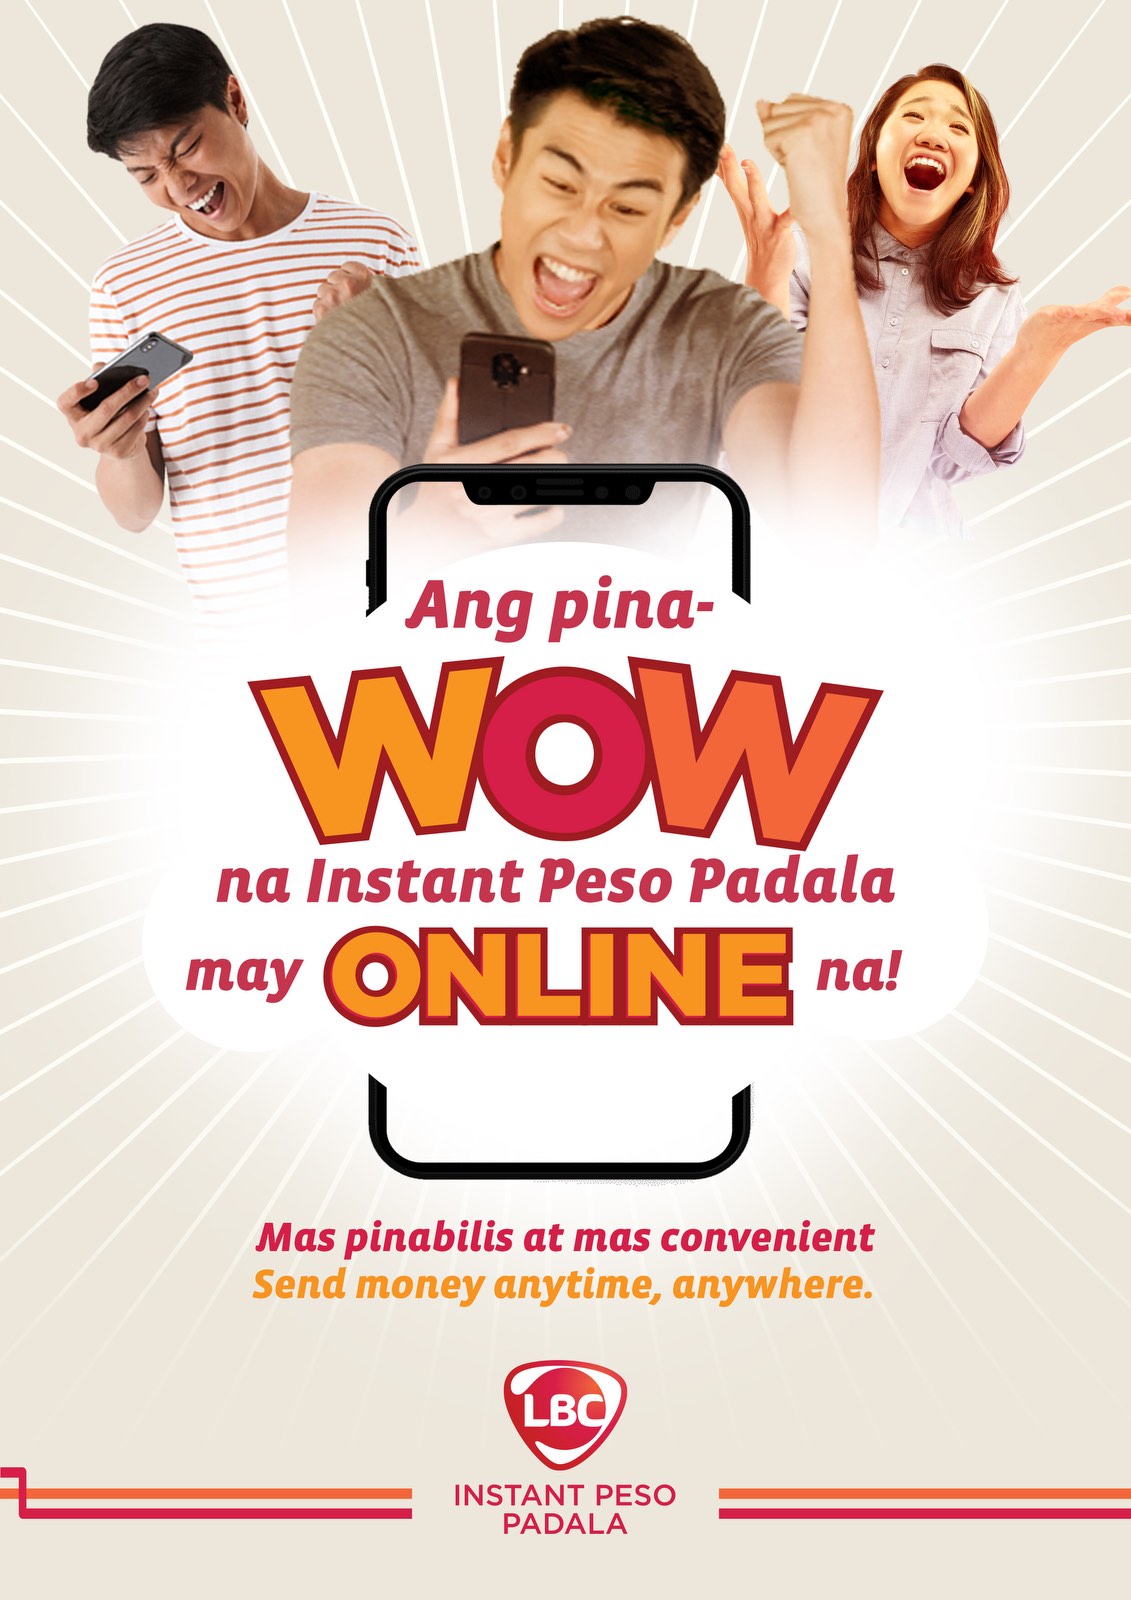 Stay home, send money online with LBC’s Instant Peso Padala